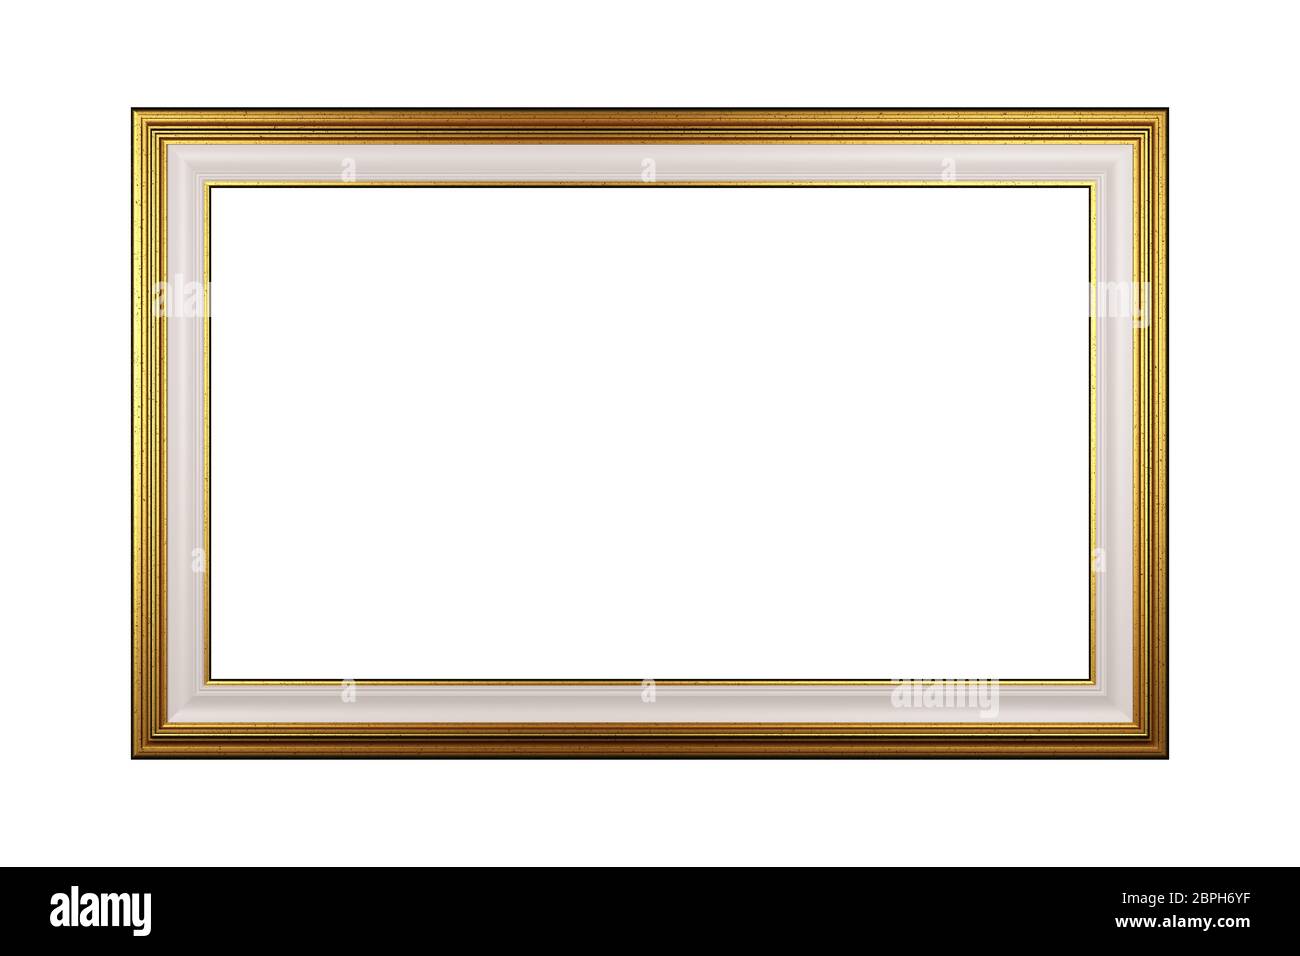 3,297,991 Vintage White Frame Images, Stock Photos, 3D objects